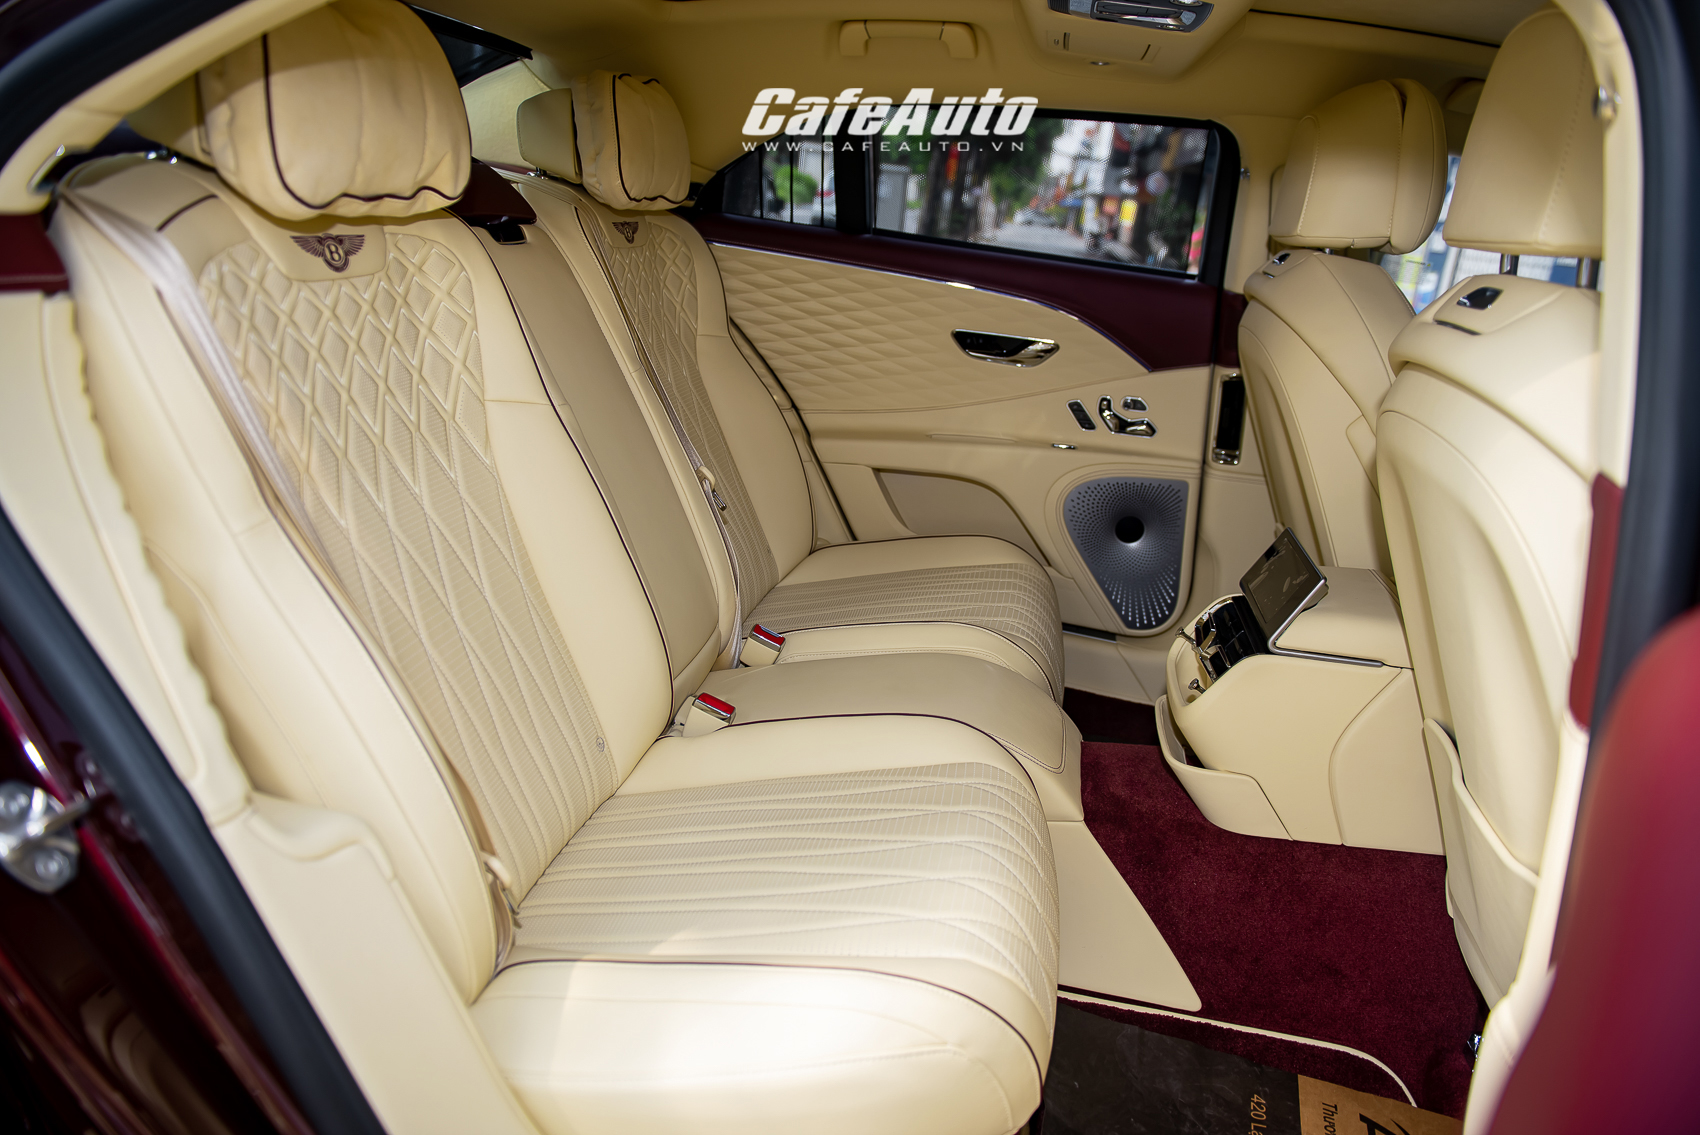 doan-di-bang-mua-bentley-flying-spur-20-ty-cafeautovn-7